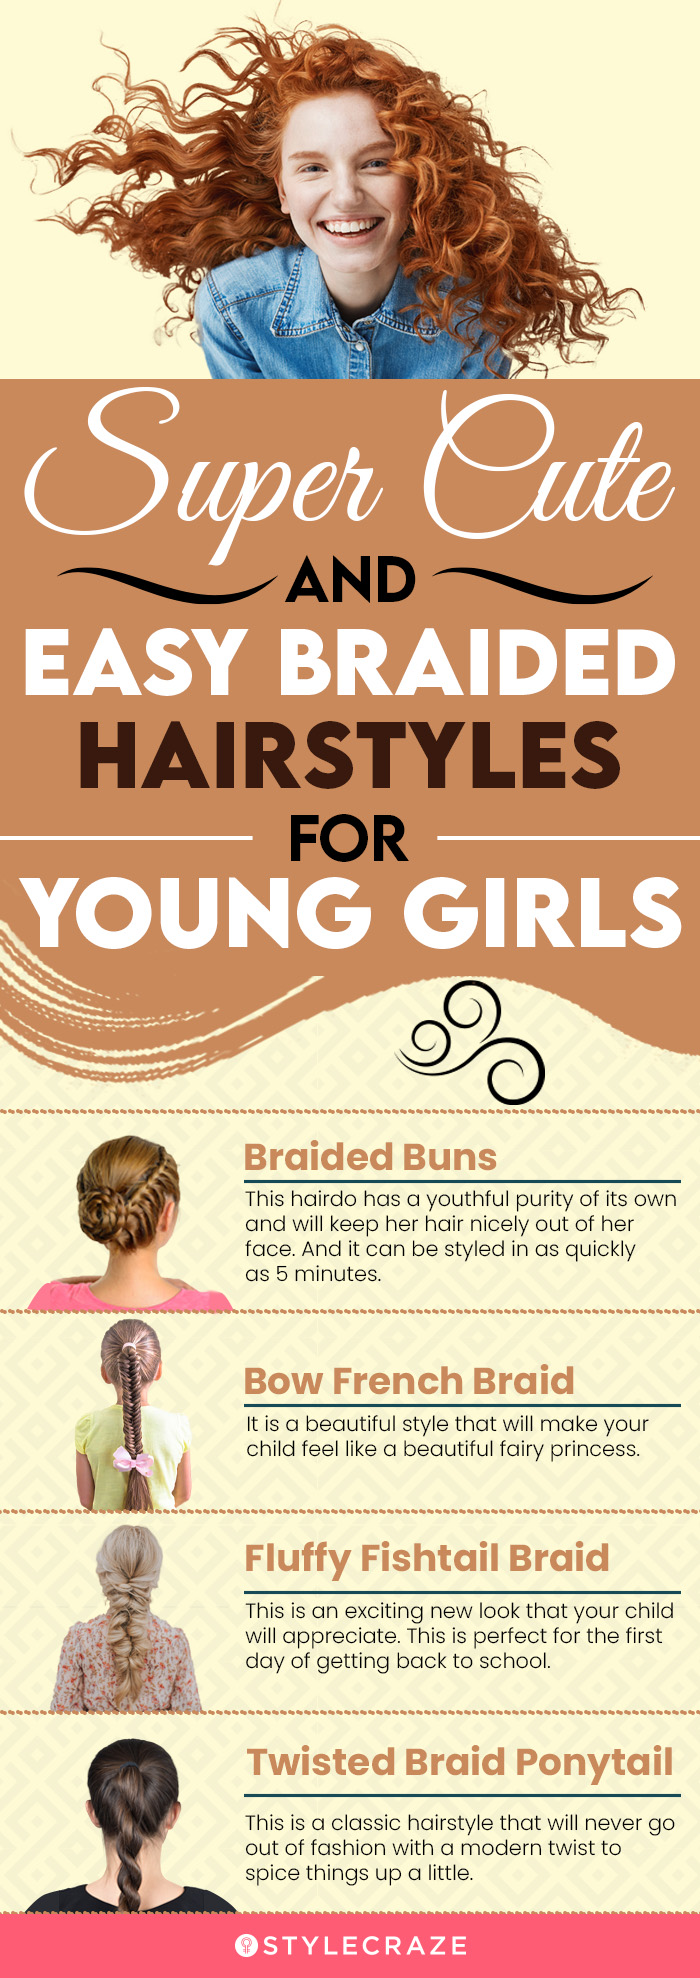 super cute and easy braided hairstyles for young girls (infographic)